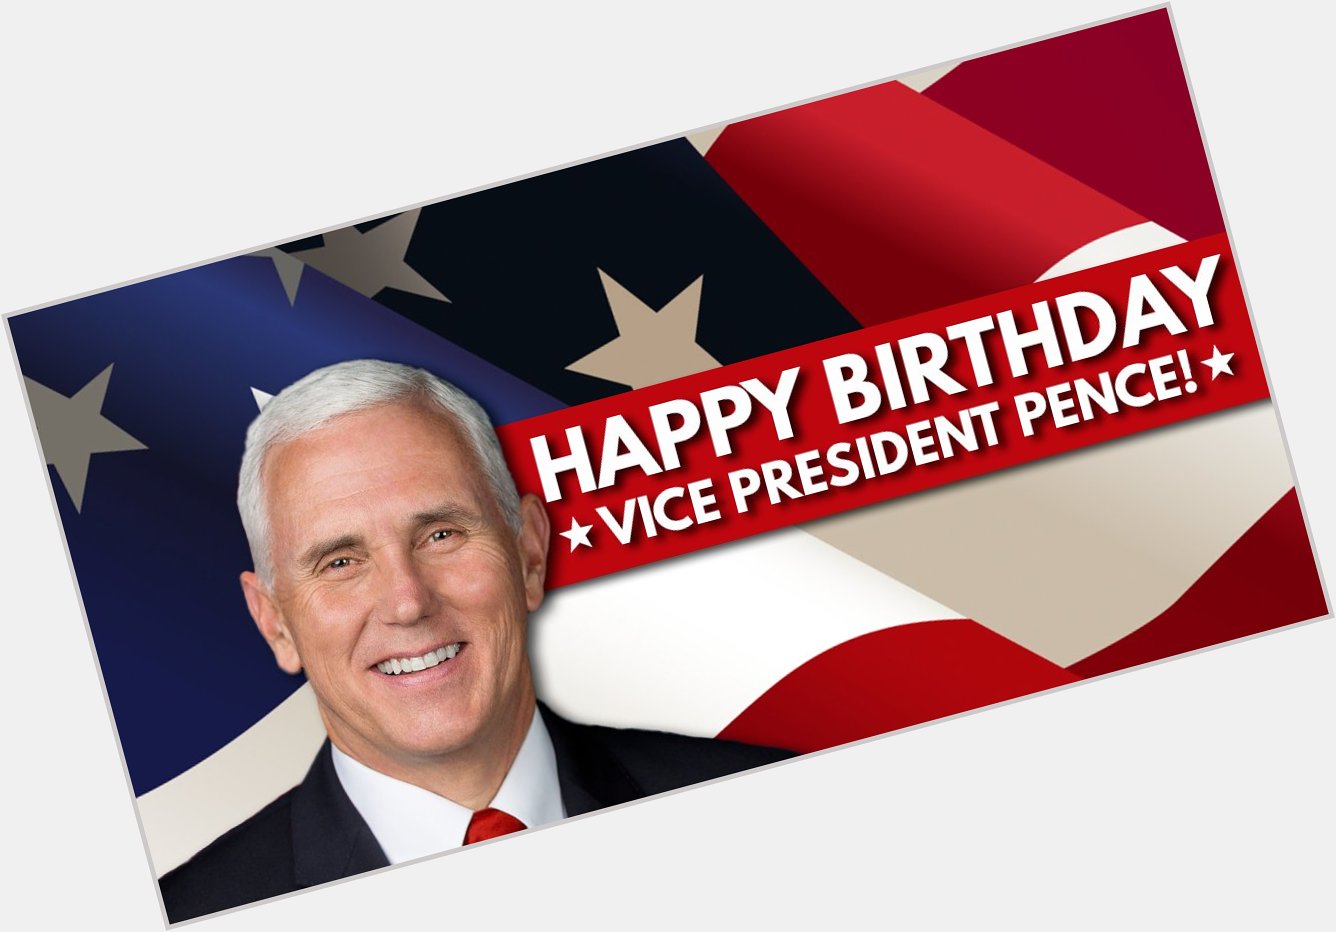 Happy Birthday to Mike Pence!  